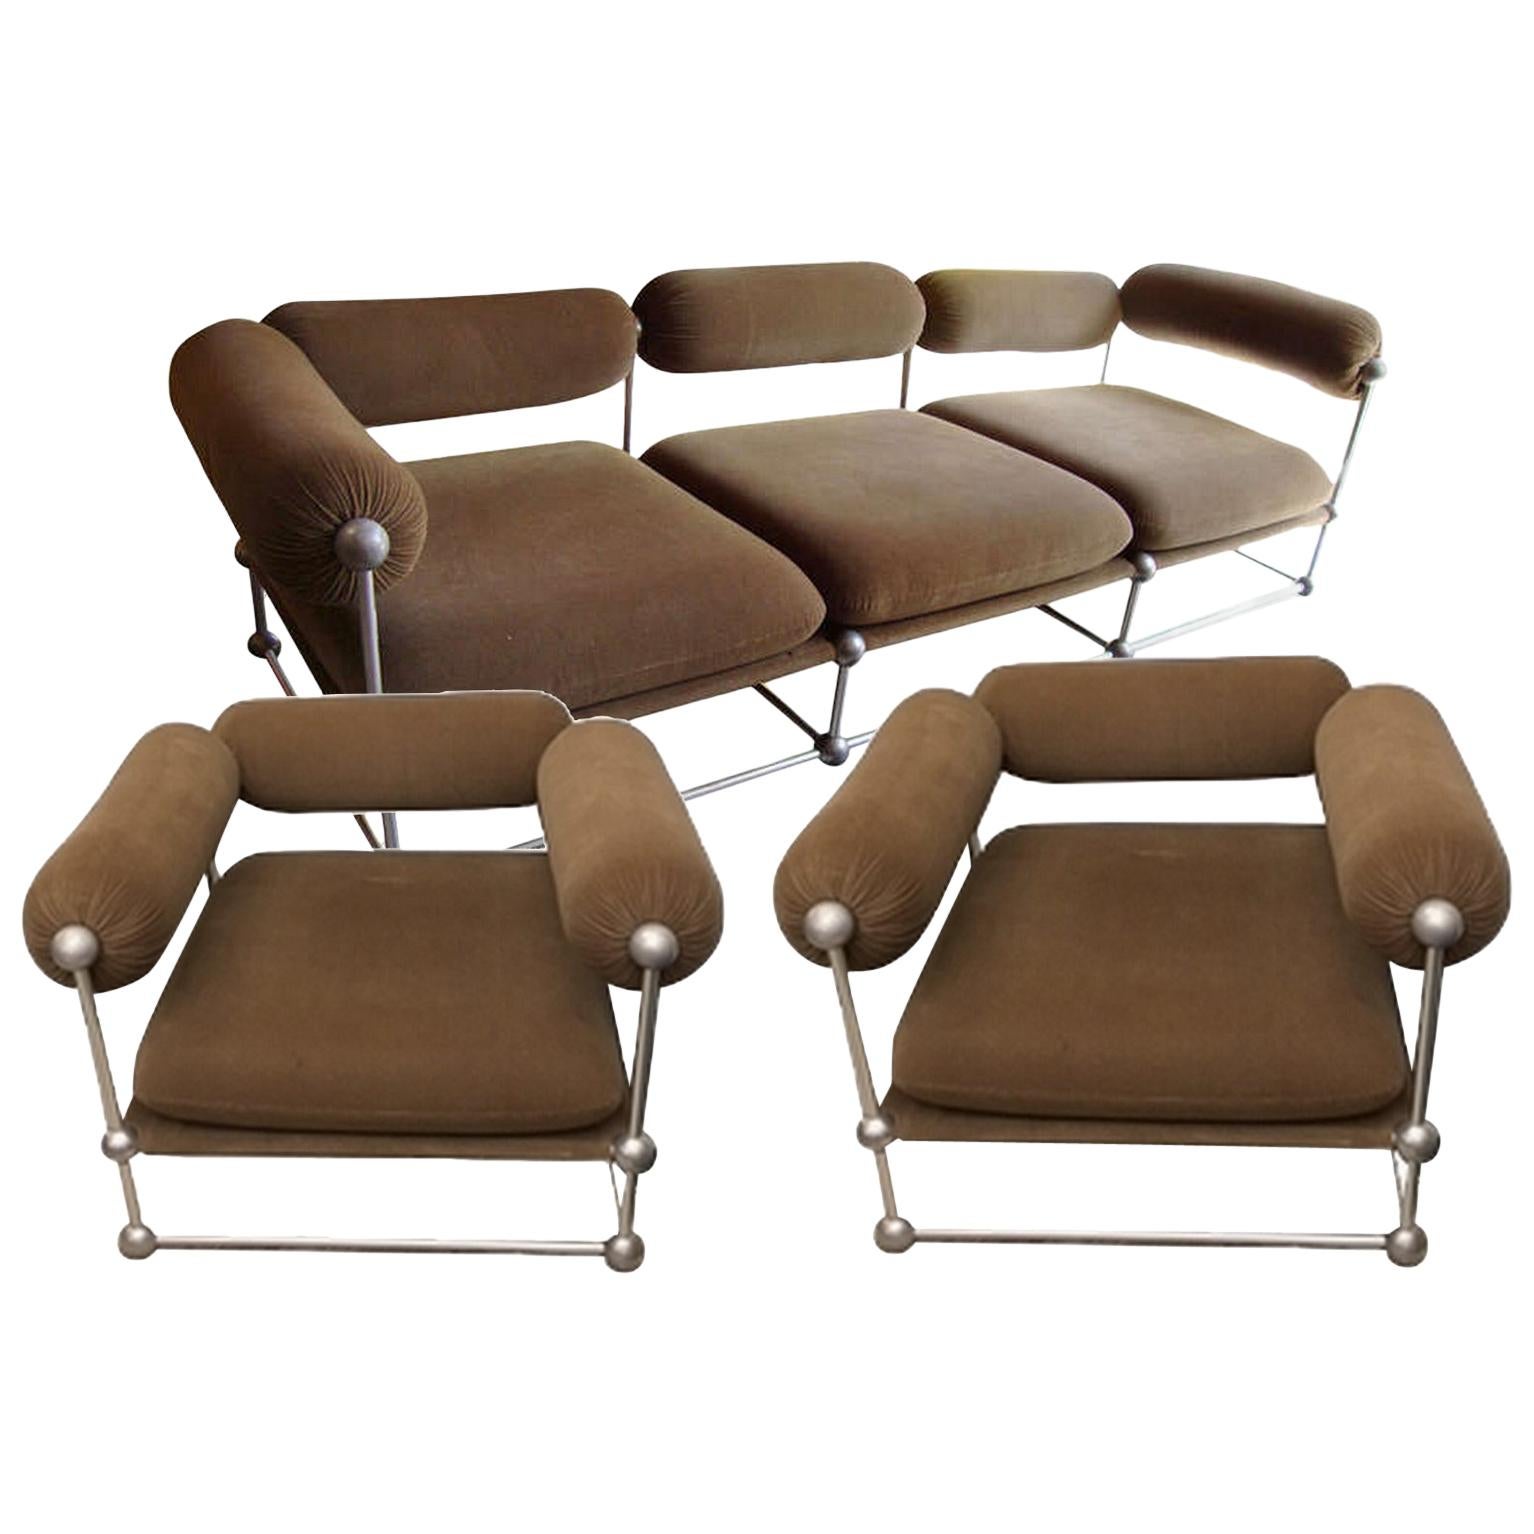 Verner Panton, S 420 Serie Living Room Set of One Canapé and Two Armchairs 